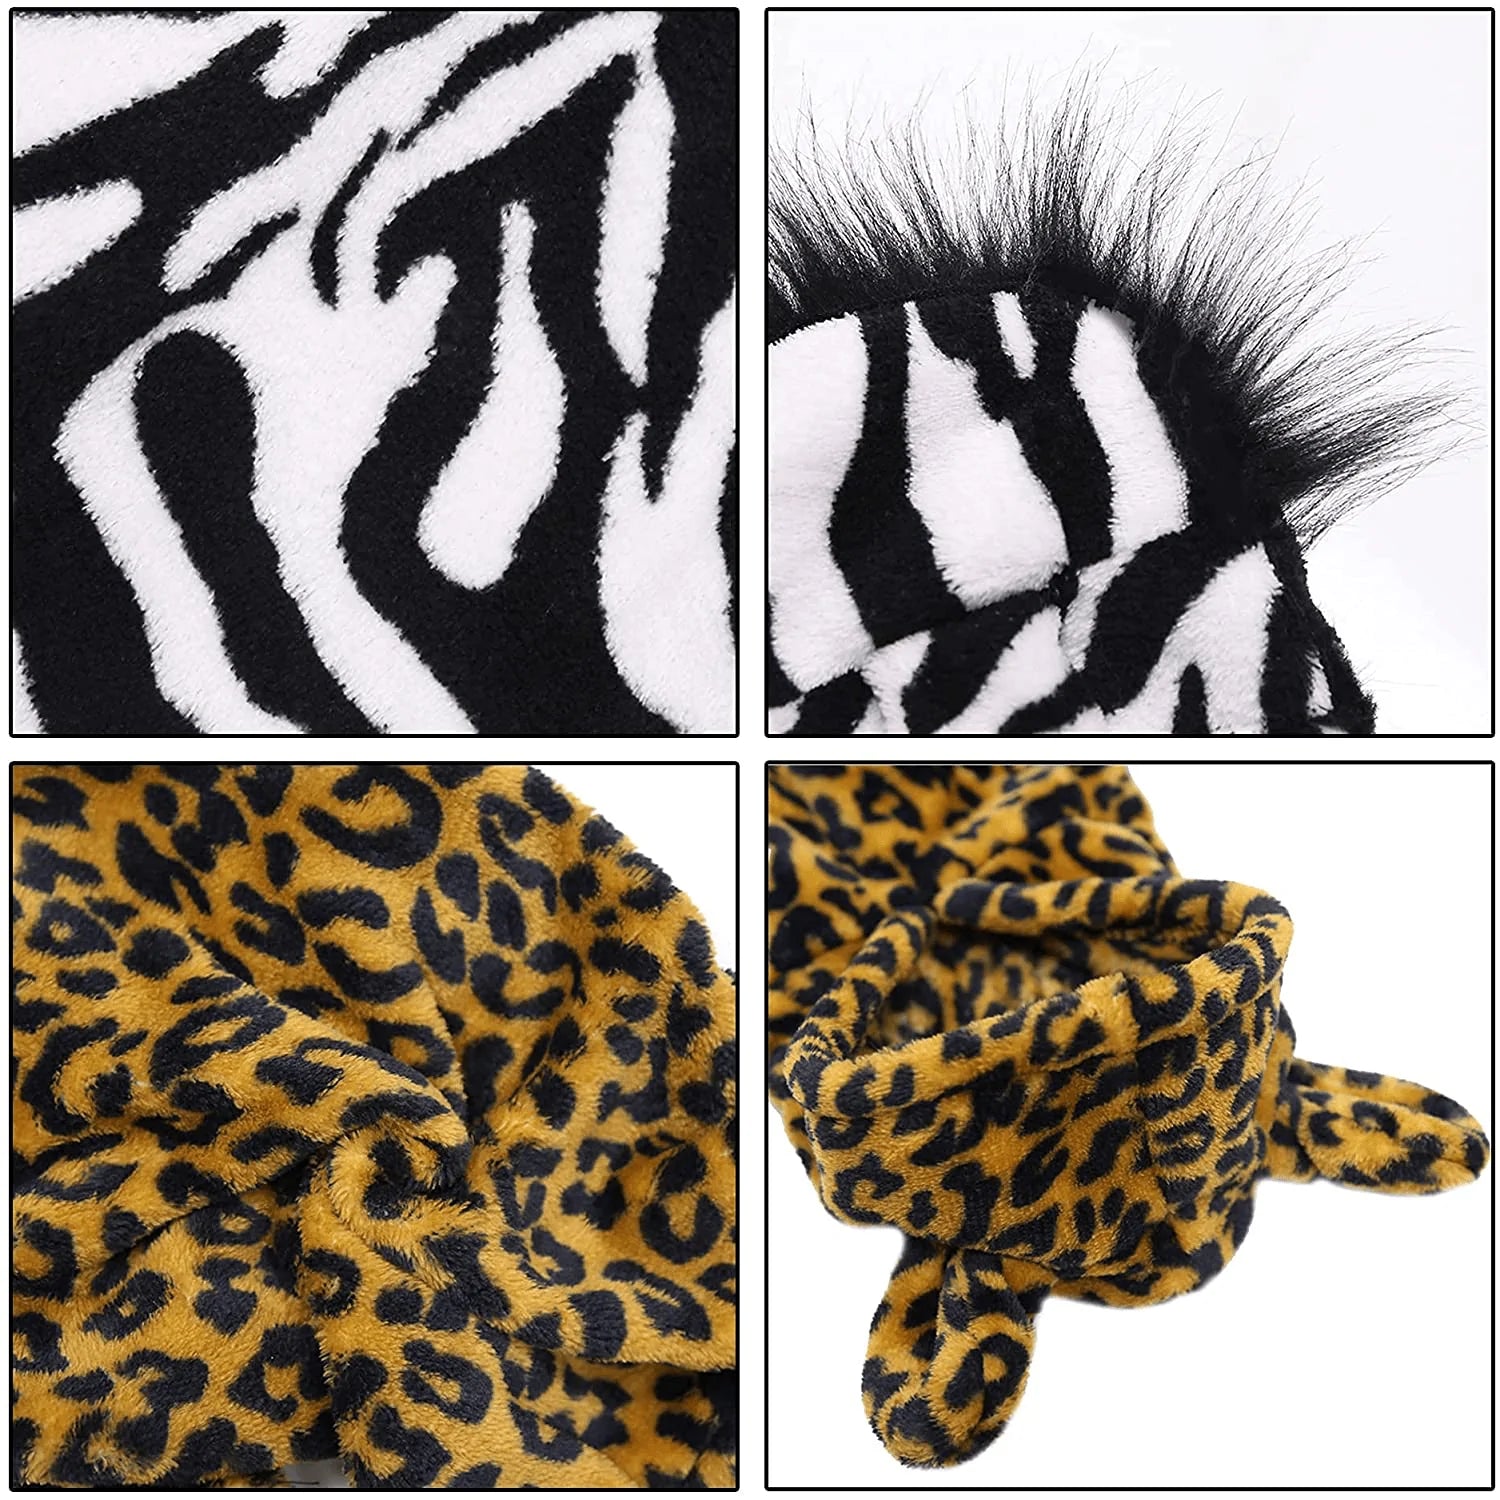 YAODHAOD Halloween Costumes for Dogs Dog Hoodie Zebra and Leopard Pet Costume Flannel Warm Coat Outfits Clothes for Small Medium Dogs Cats Halloween Cosplay Apparel（2 Pack）